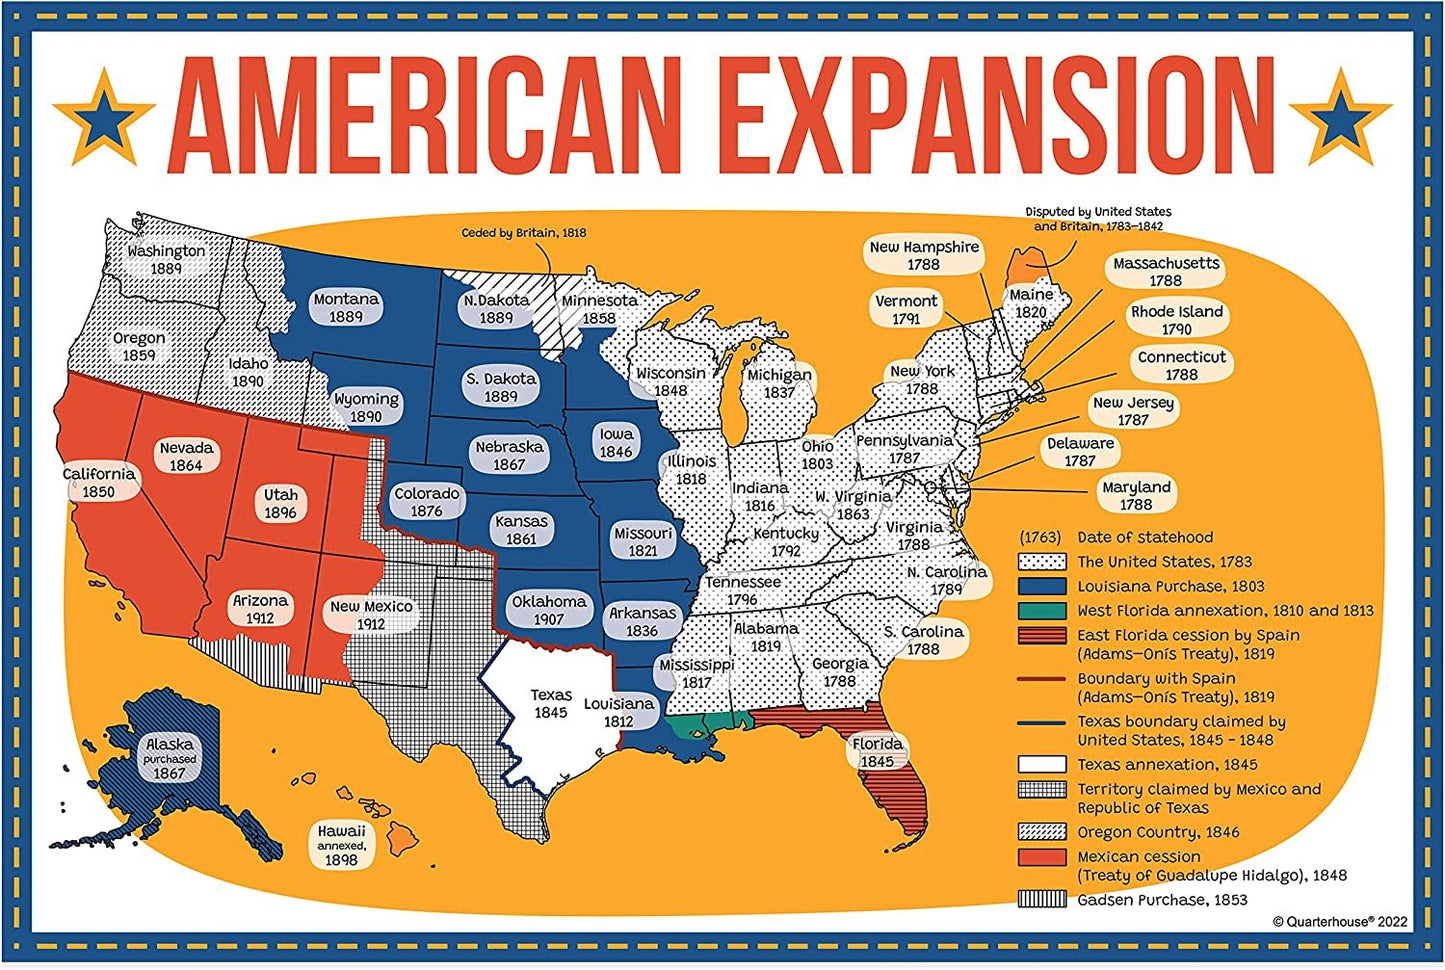 Quarterhouse American Expansion in US History Poster Set, Social Studies Classroom Learning Materials for K-12 Students and Teachers, Set of 5, 12 x 18 Inches, Extra Durable